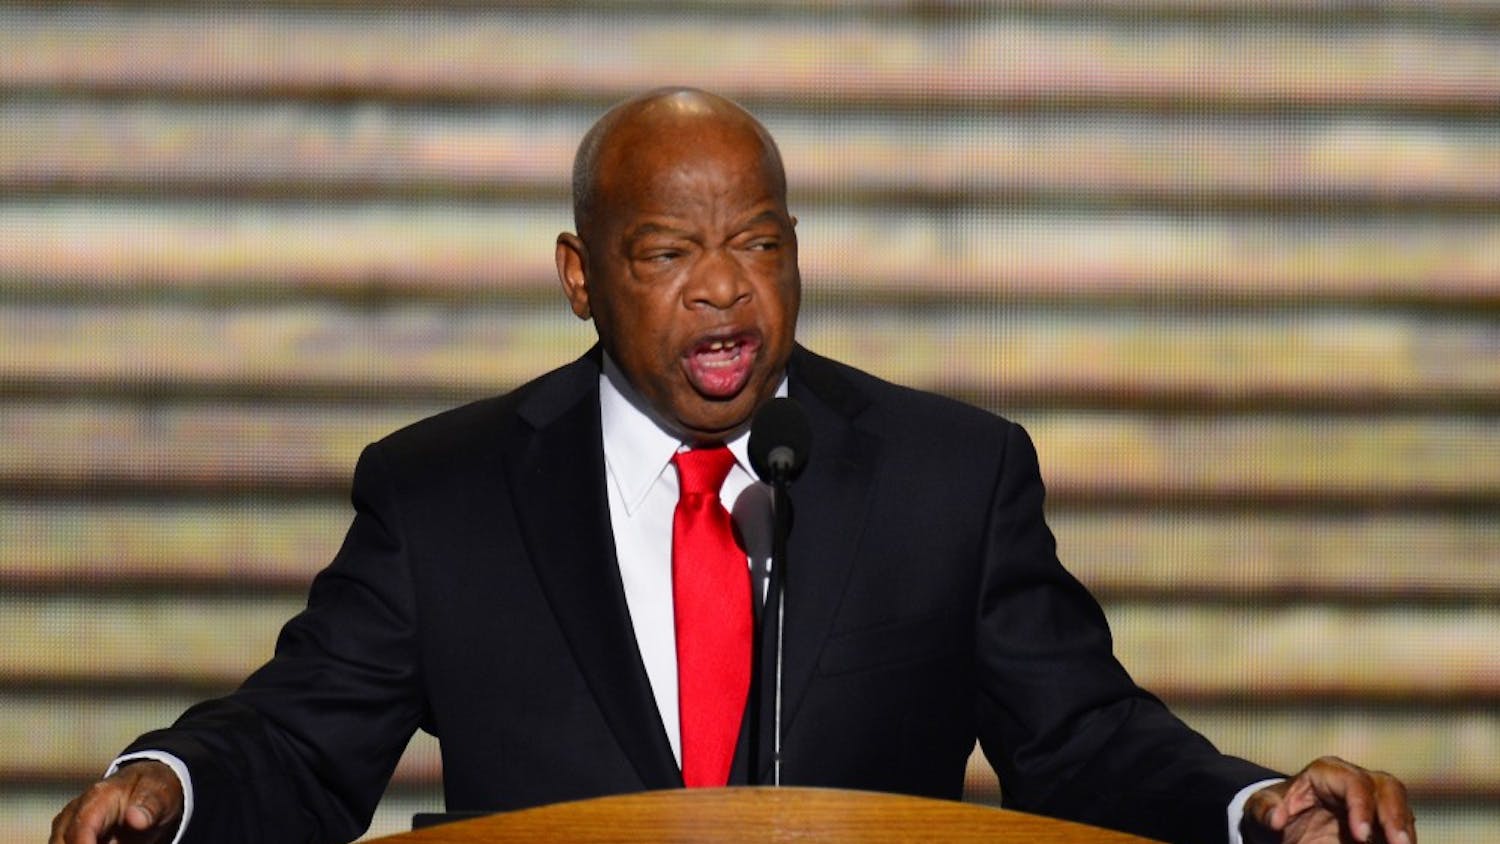 U.S. Rep. John Lewis (D-GA) speaks at the 2012 Democratic National Convention in Times Warner Cable Arena Thursday, September 6, 2012 in Charlotte, North Carolina. (Harry E. Walker/MCT)